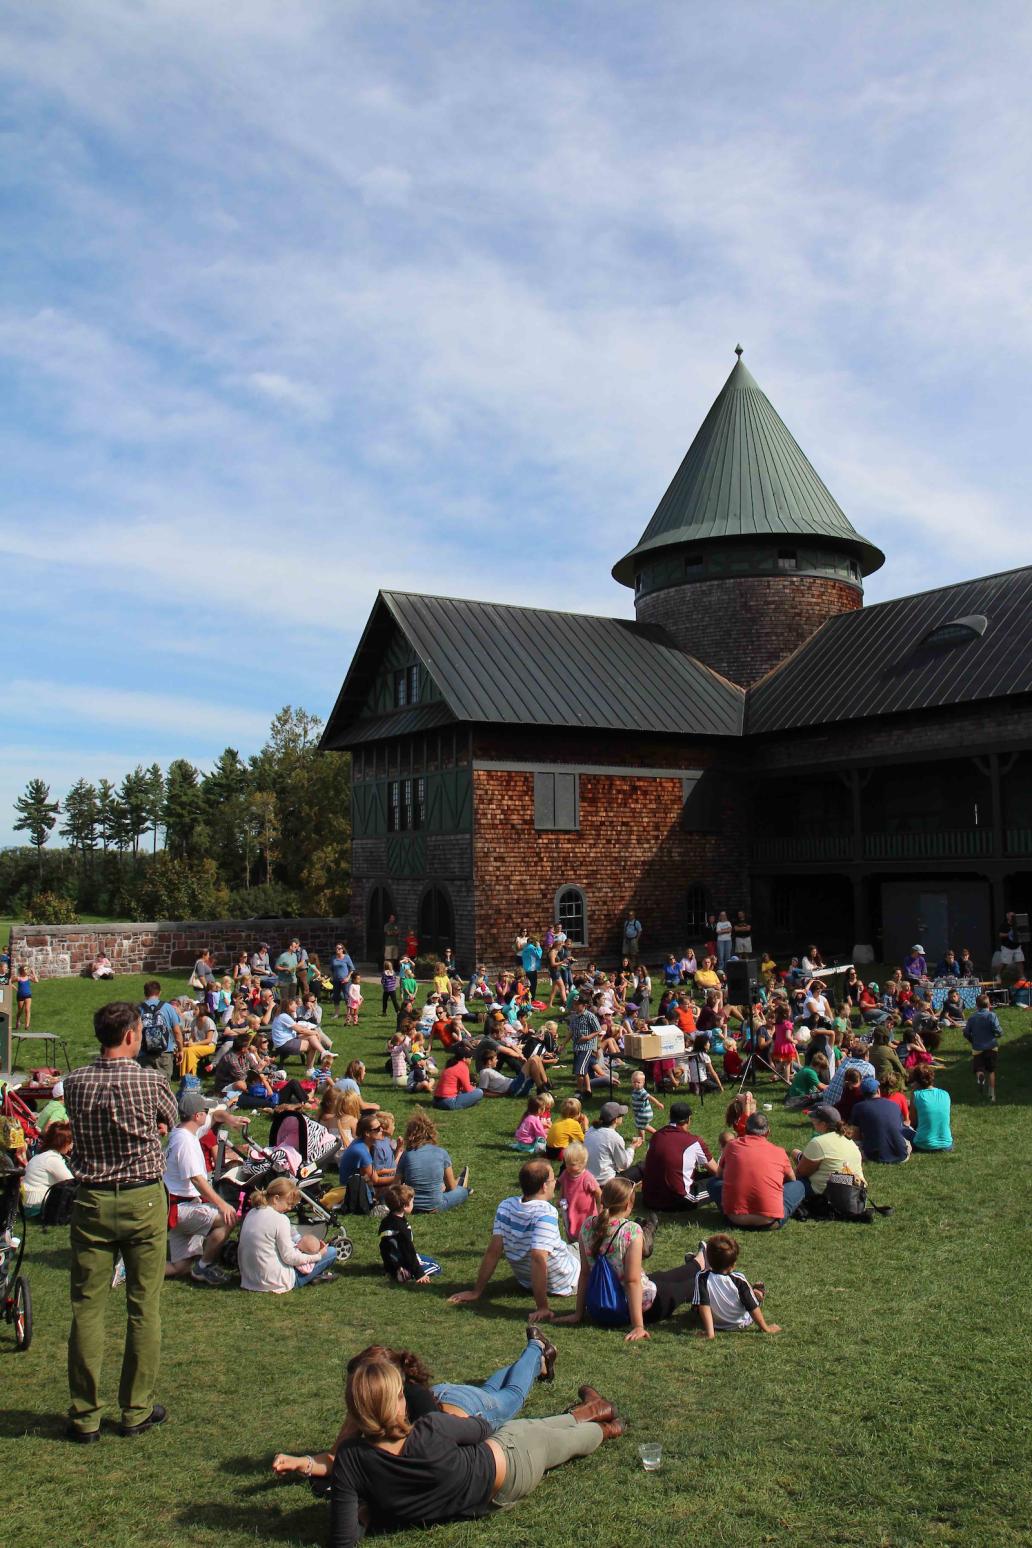 The Farm Barn Courtyard, filled with people watching a concert.